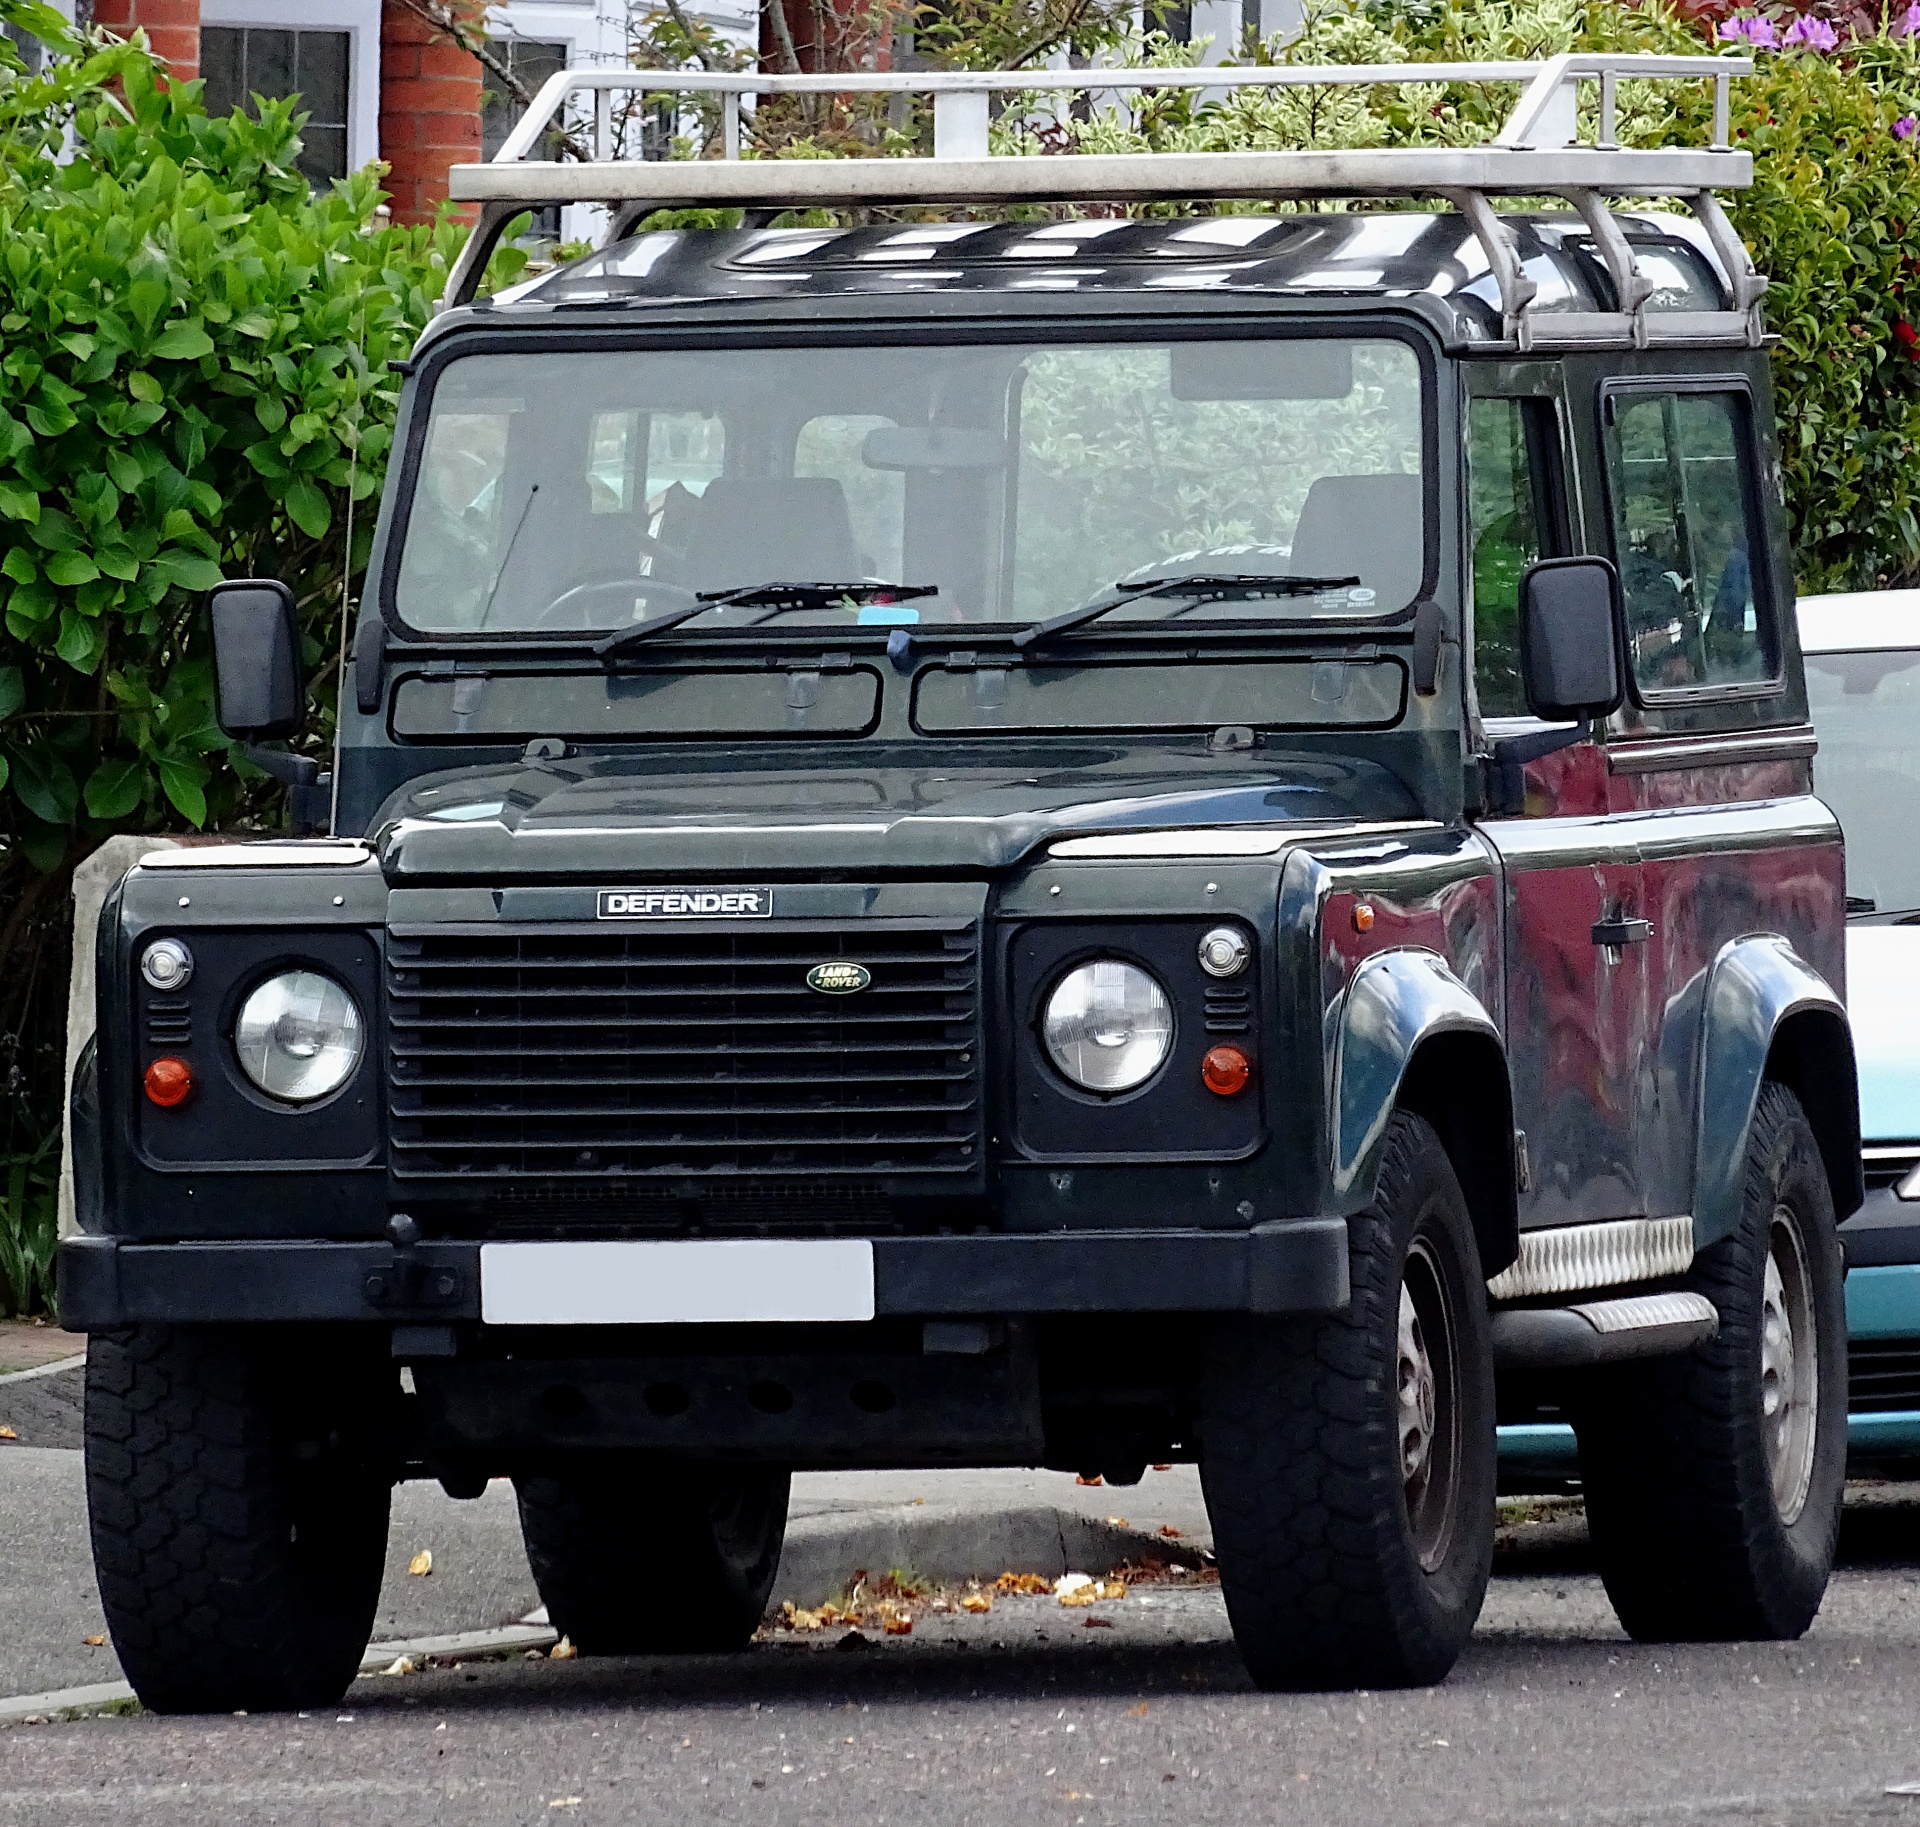 Land Rover Jeep Defender 4x4 Vehicle 020520